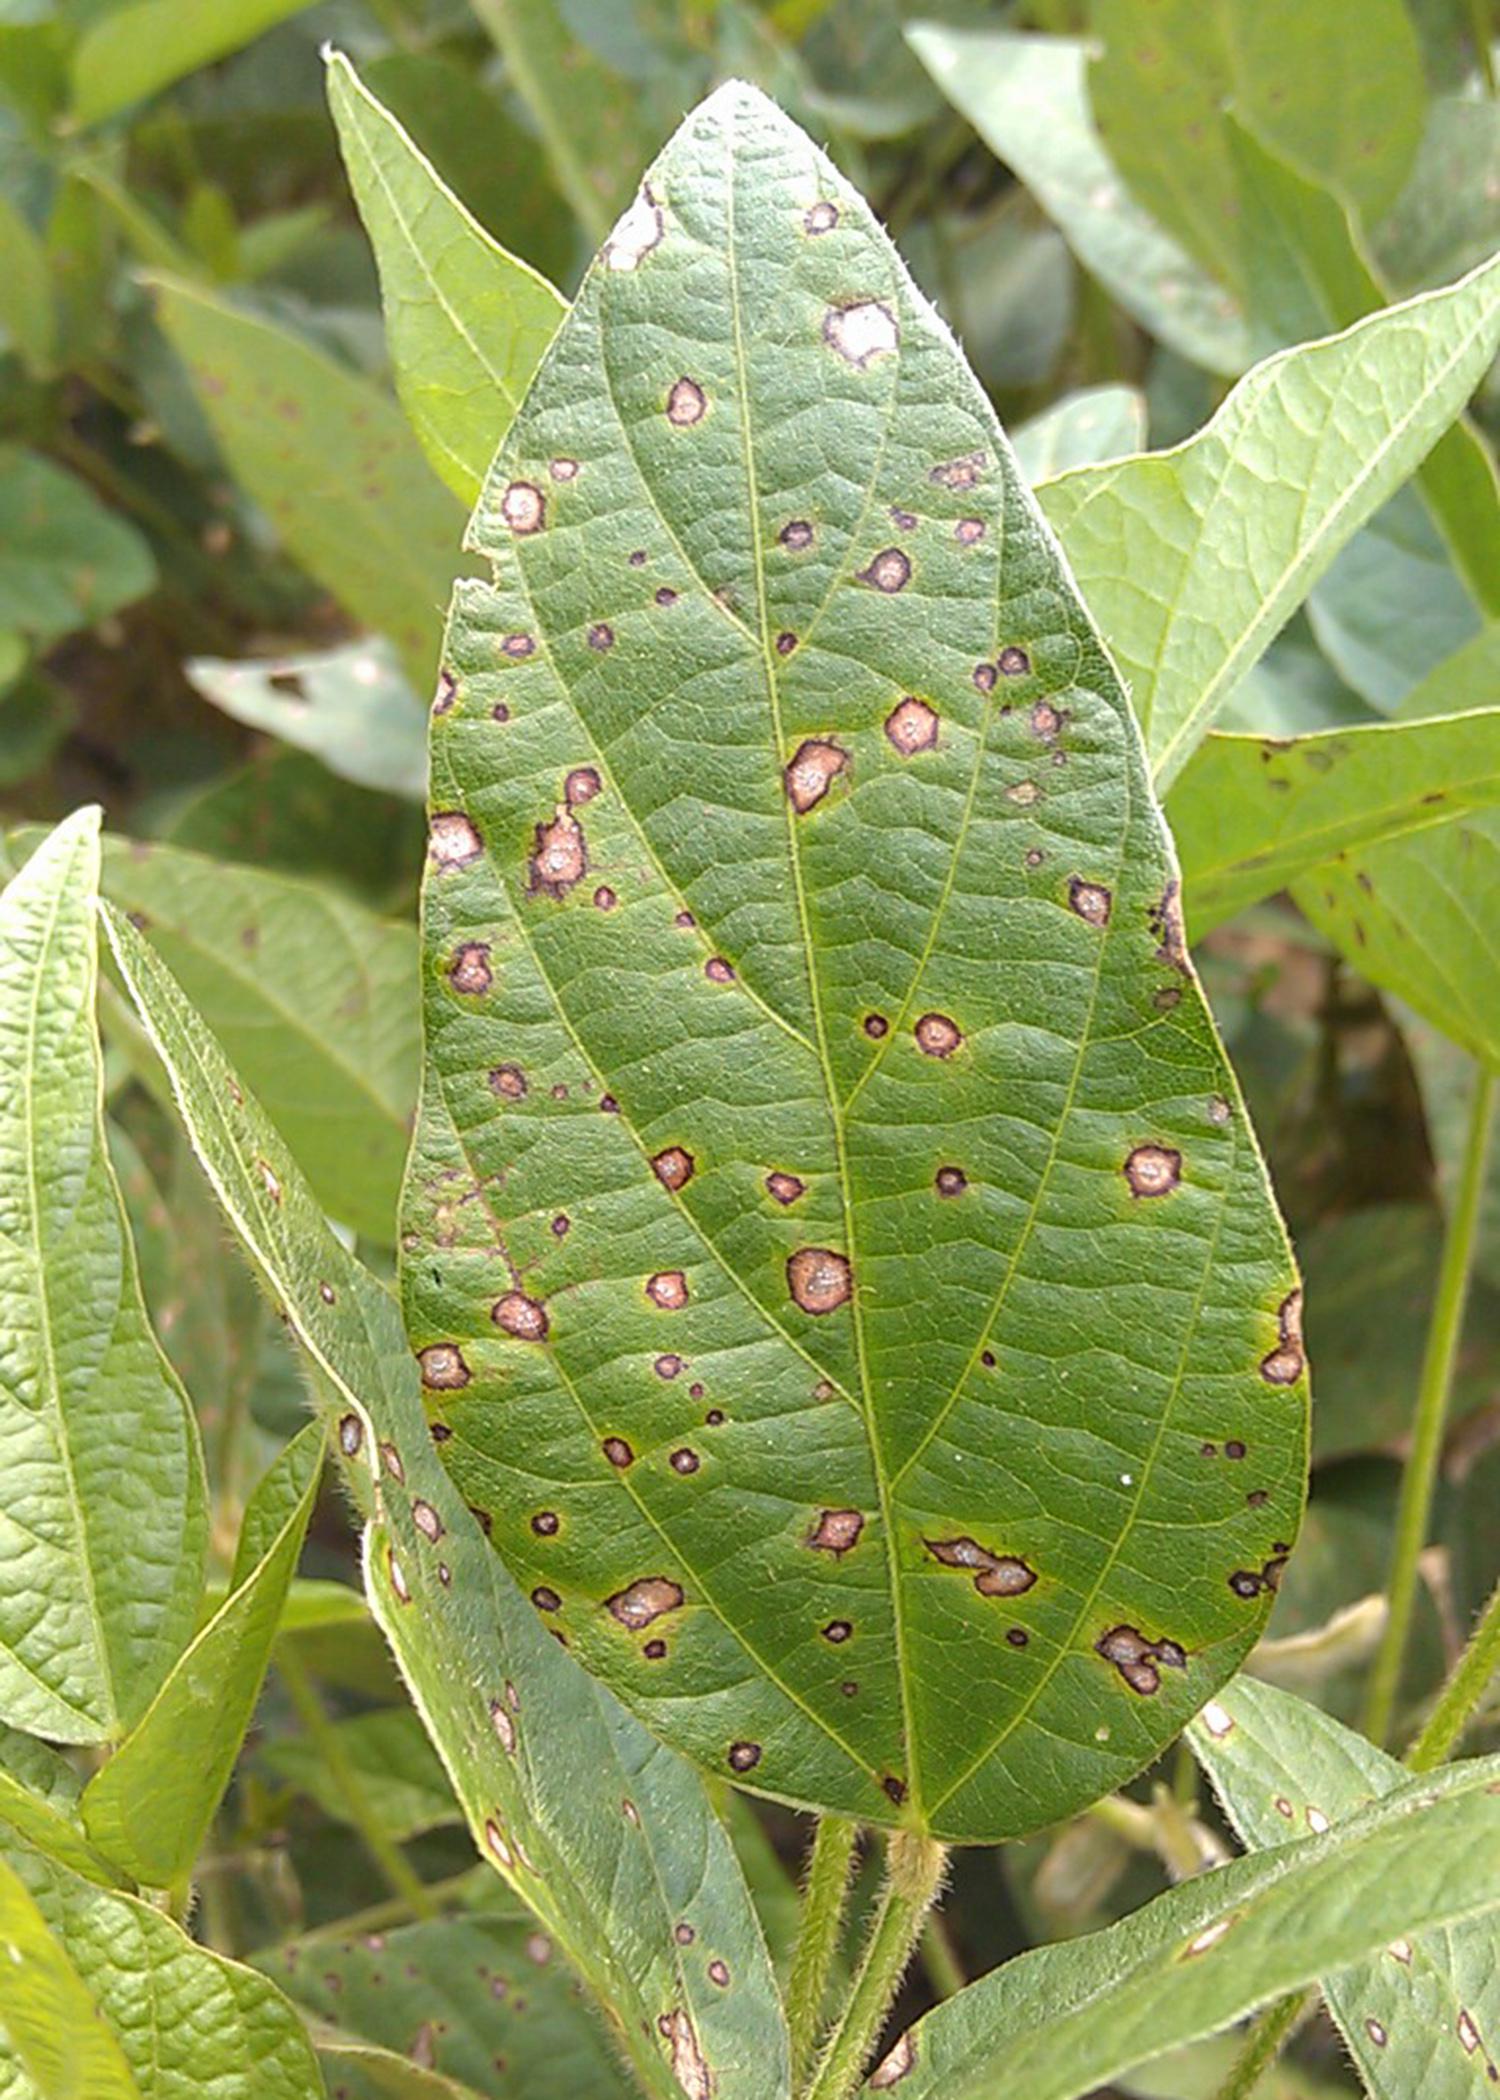 Frogeye leaf spot fungus, such as the specimen seen on this leaf, causes serious yield losses when not treated in soybeans. Mississippi State University is surveying to monitor and limit the increasing resistance of the fungus to the strobilurin class of fungicides commonly used for late-season disease management in soybean fields. (Photo by MAFES/Sead Sabanadzovic)